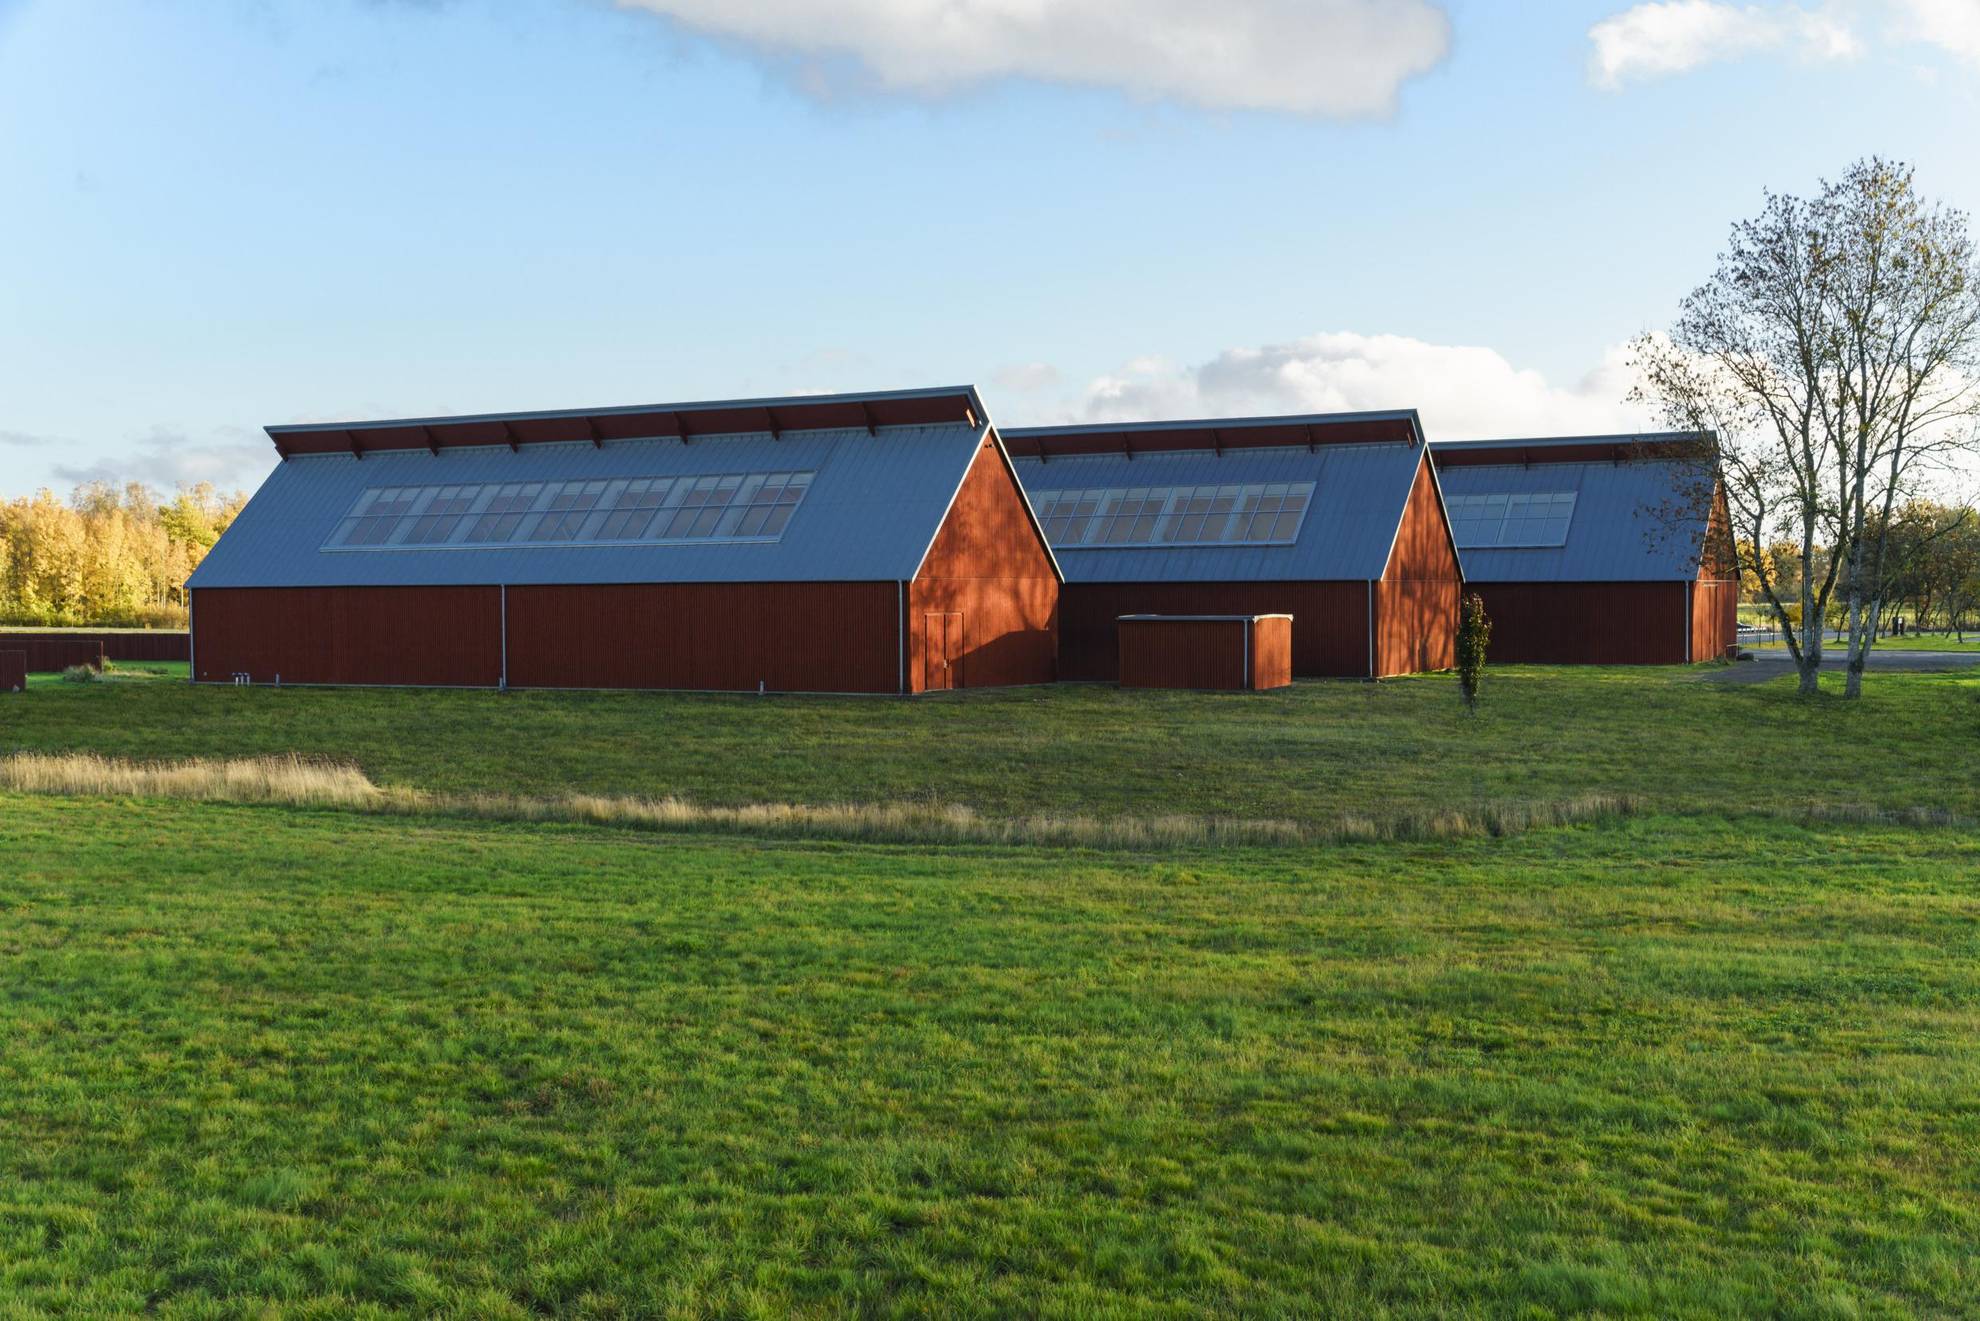 The three wooden barns of Vandalorum, located on a grass field.